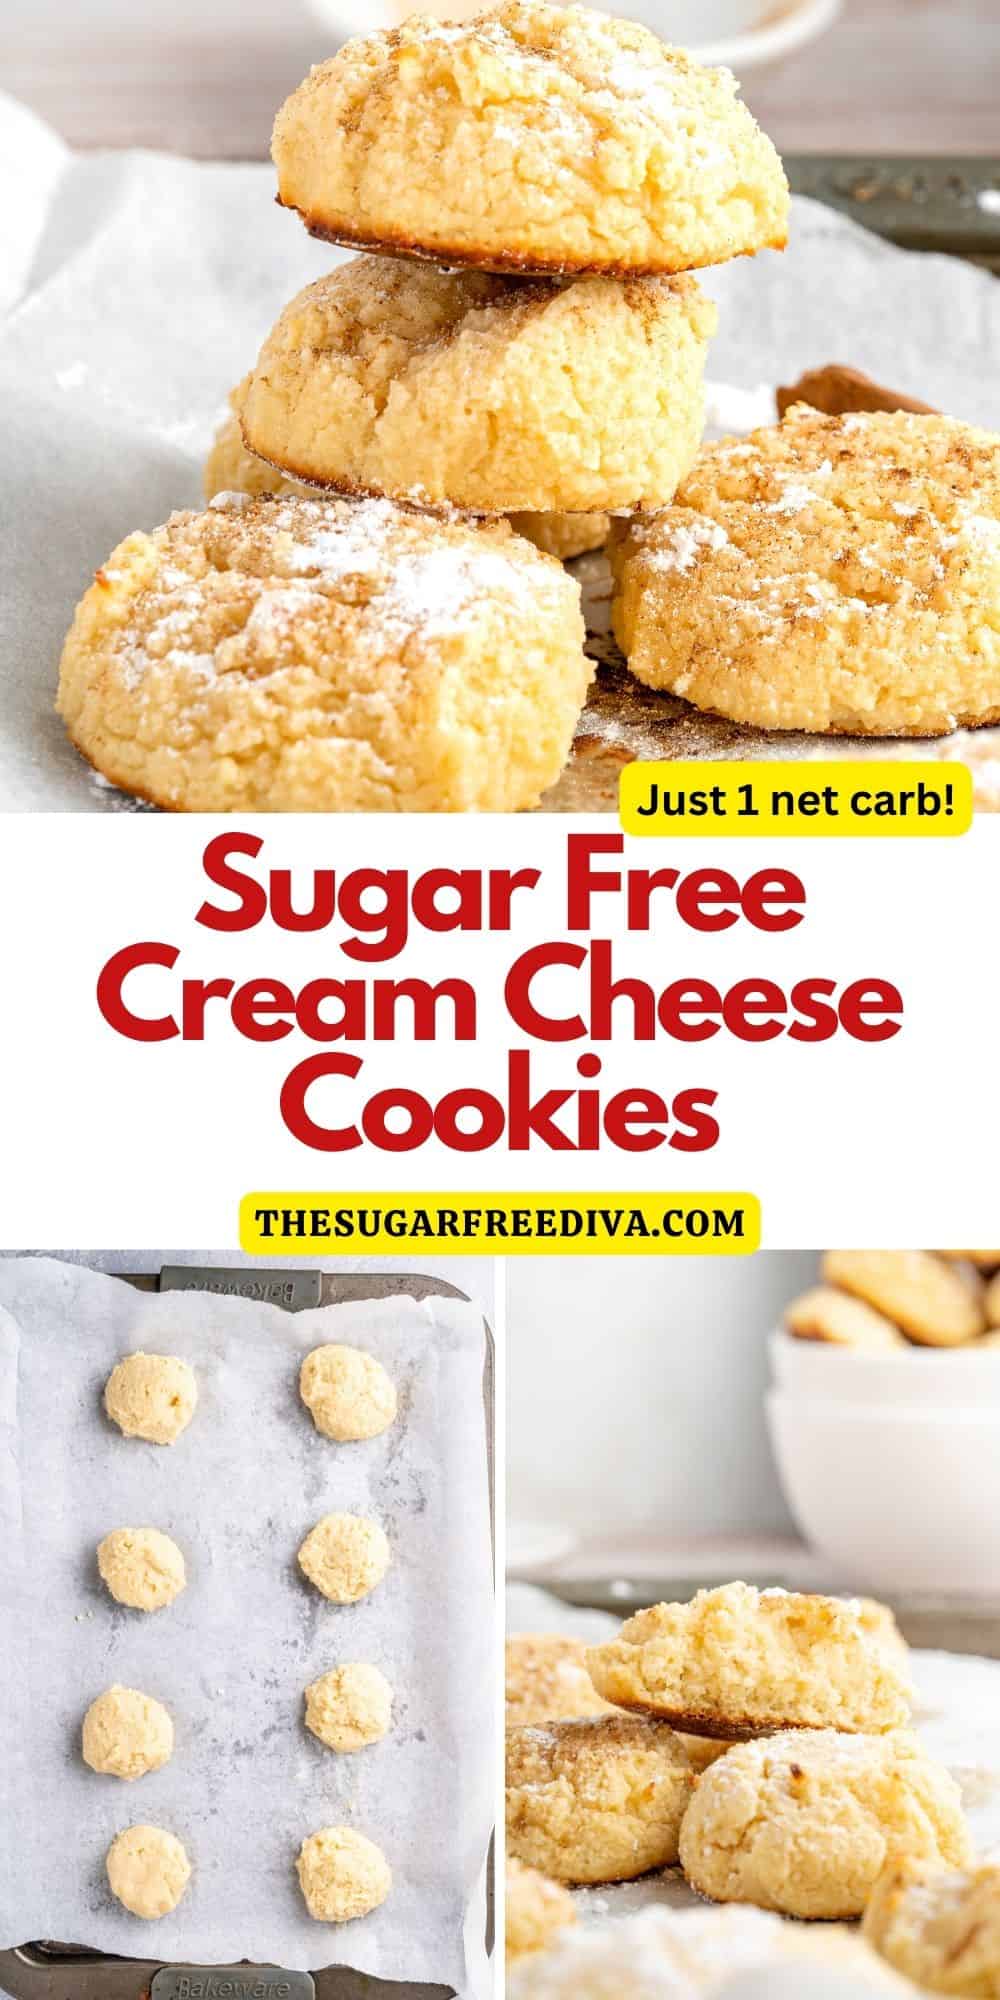 Sugar Free Low Carb Cream Cheese Cookies, a simple and delicious recipe for cookies made with almond flour. Gluten Free and Keto.